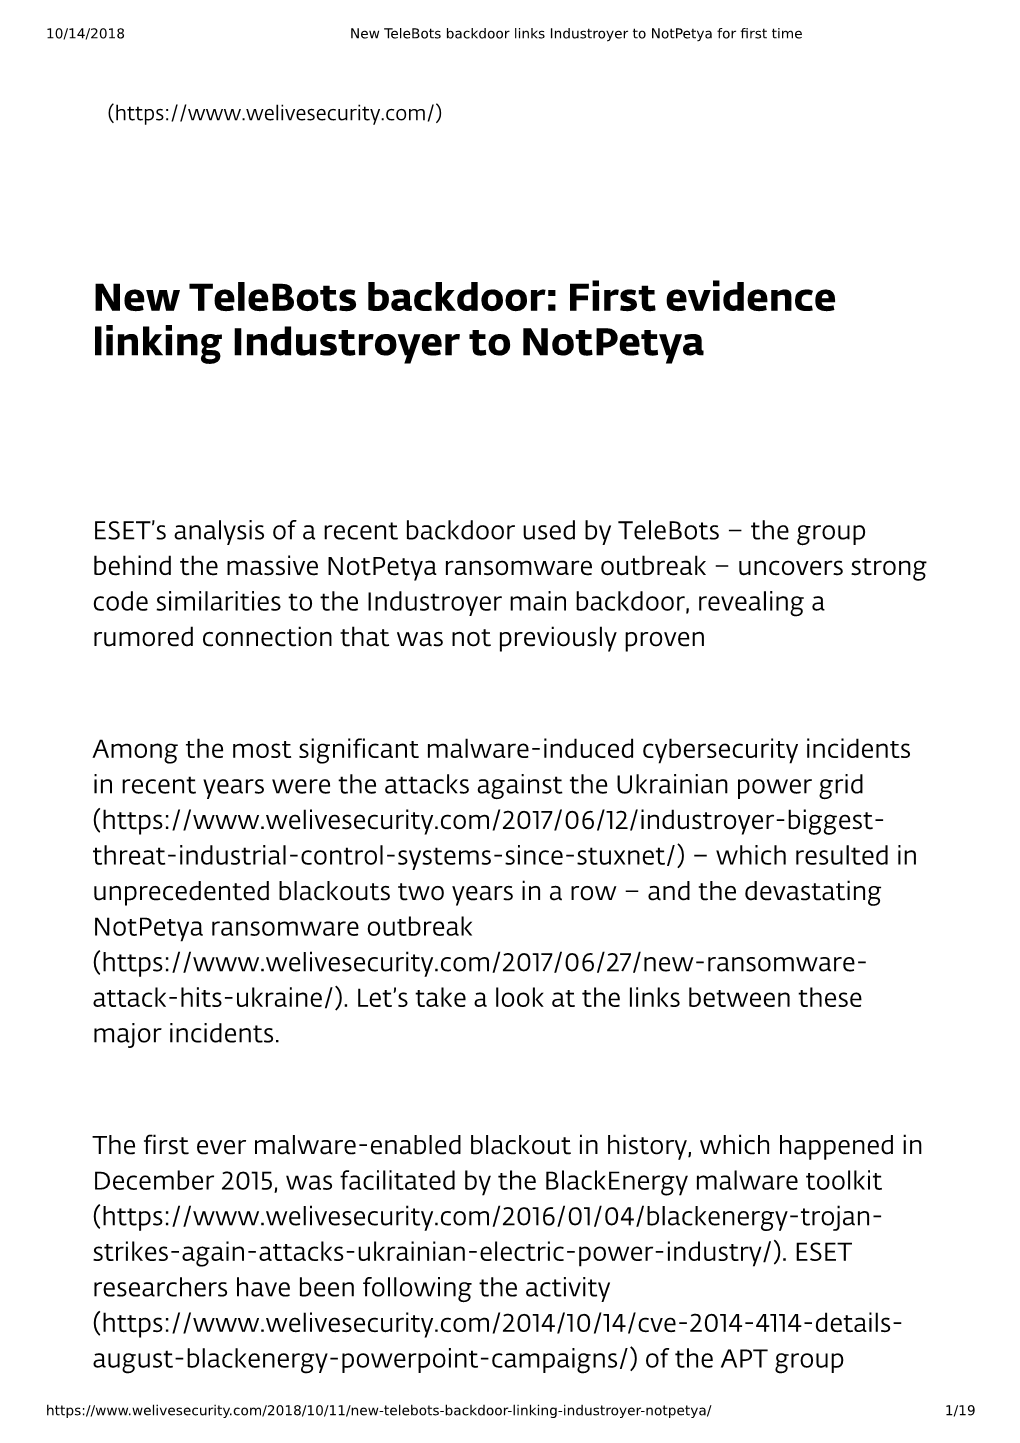 New Telebots Backdoor: First Evidence Linking Industroyer to Notpetya